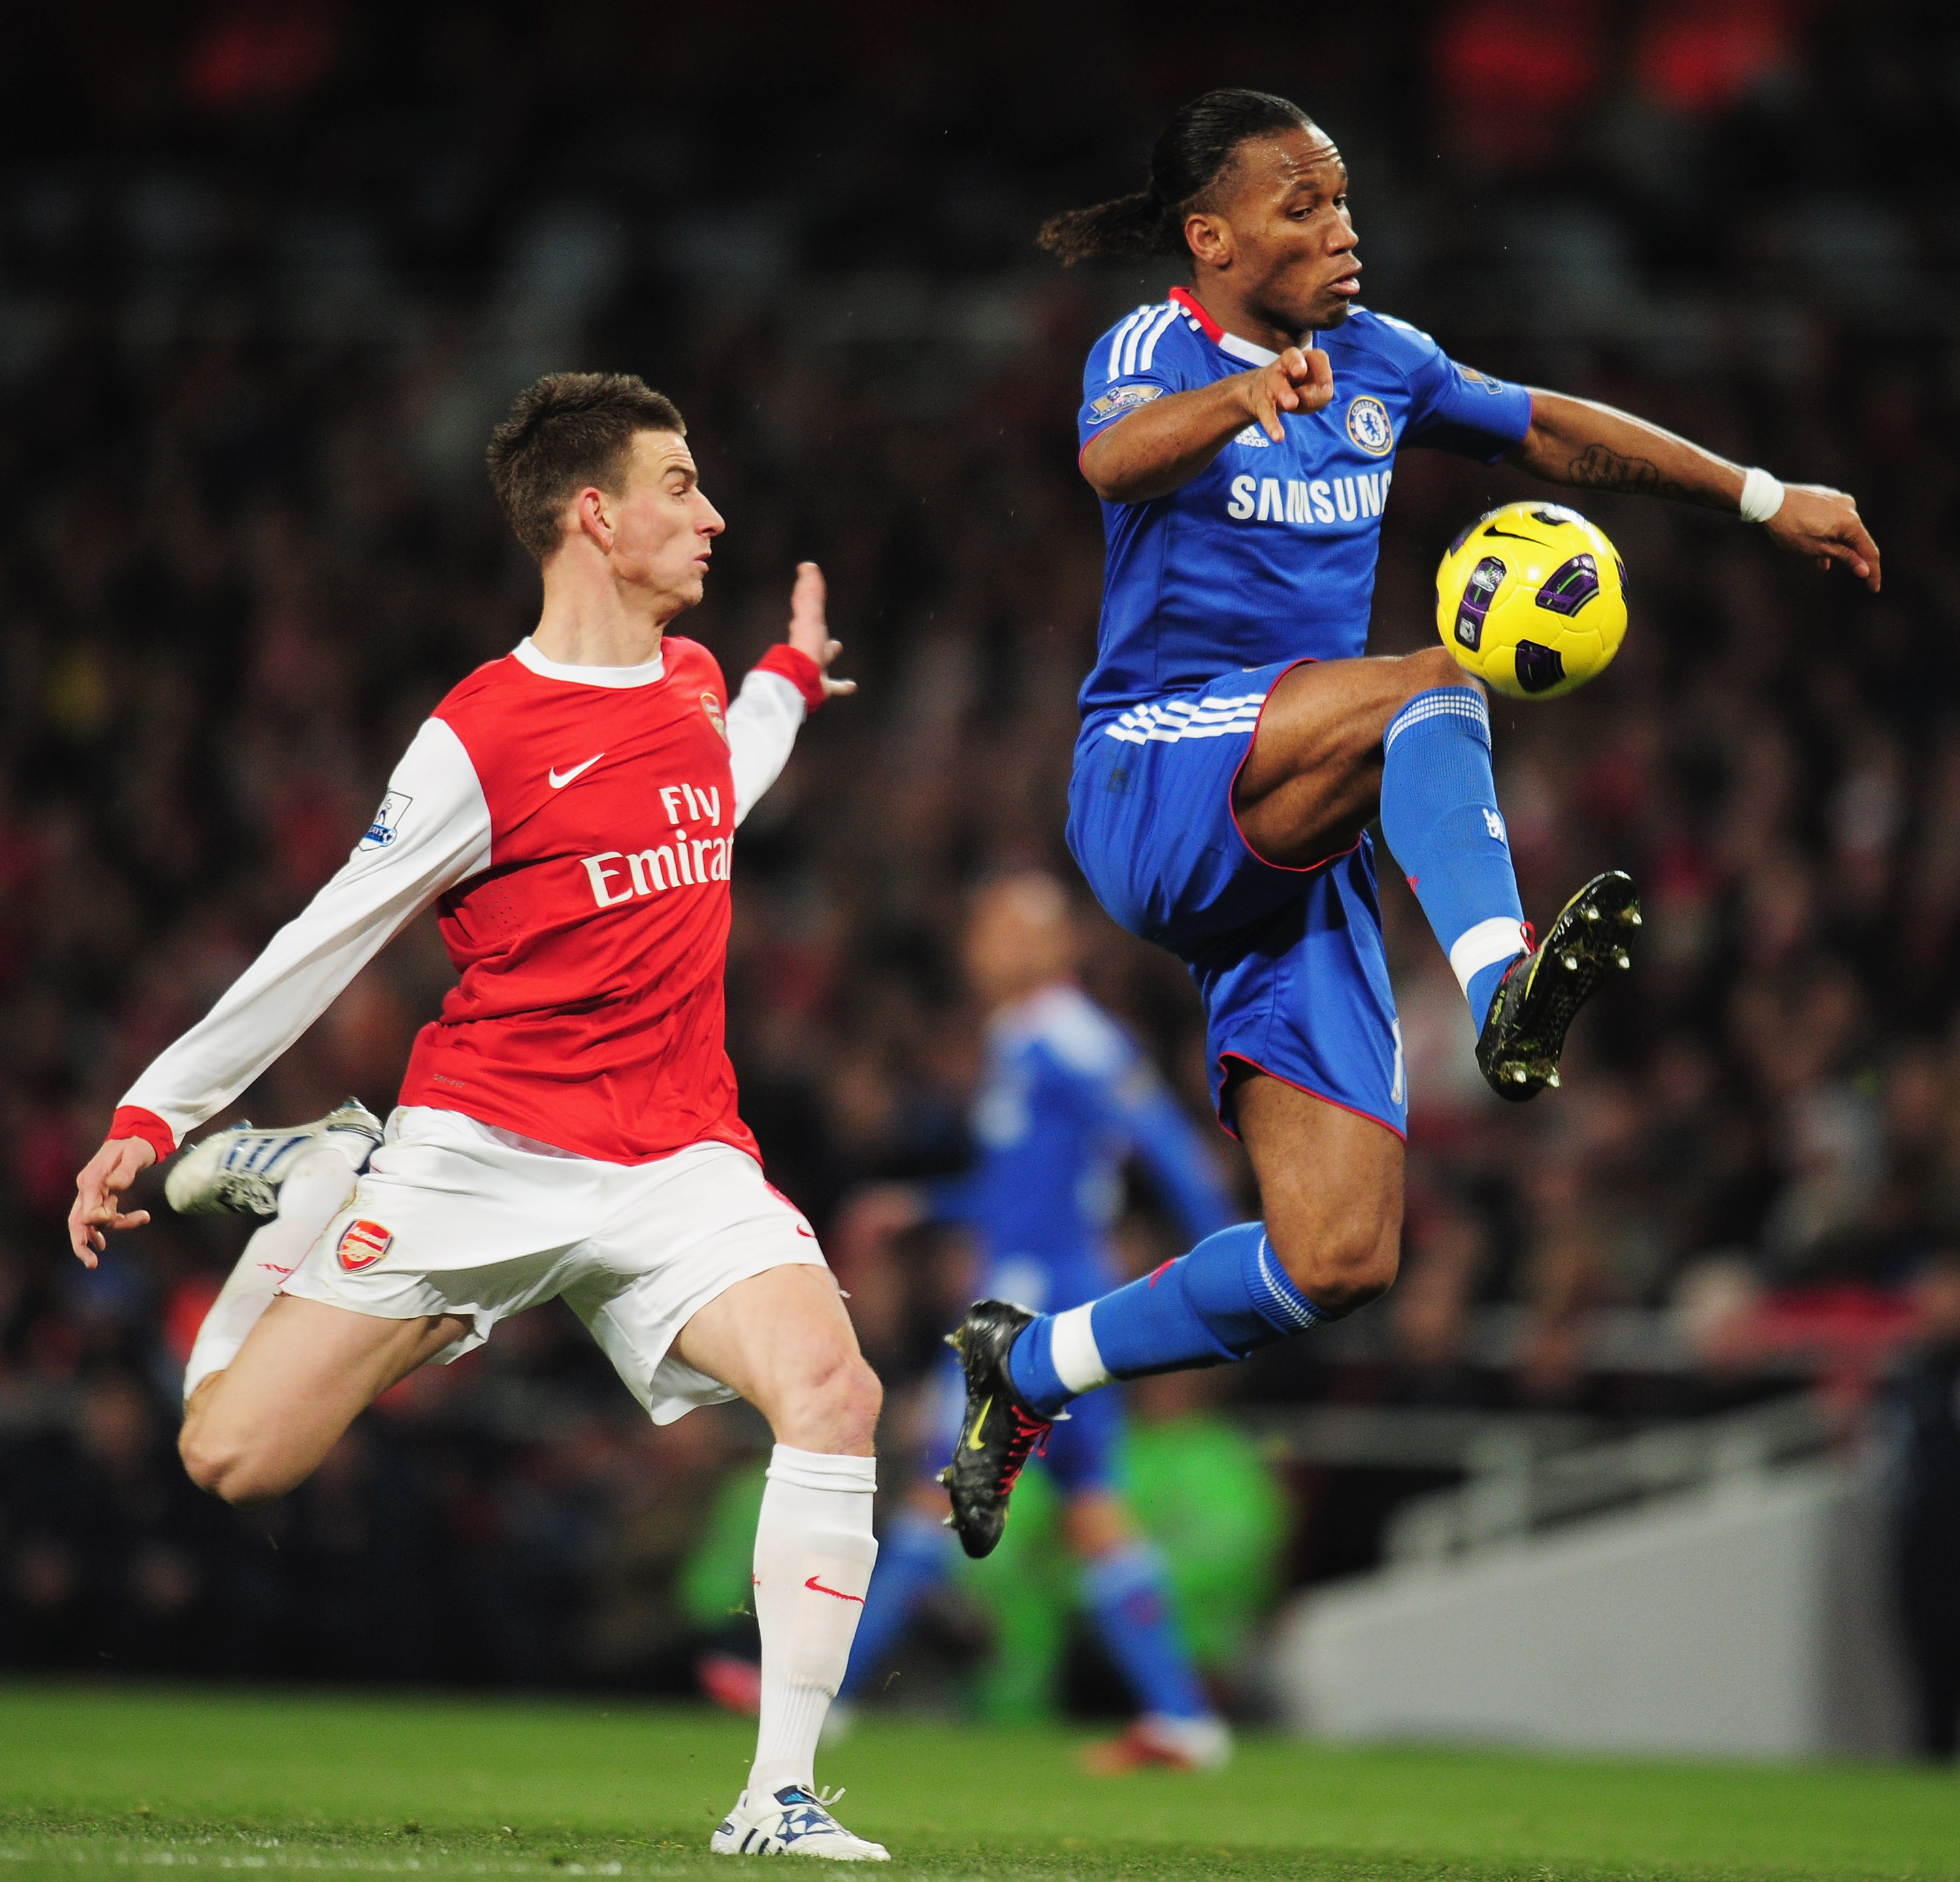 LONDON, ENGLAND - DECEMBER 27:  Didier Drogba of Chelsea controls the ball watched by Laurent Koscielny of Arsenal during the Barclays Premier League match between Arsenal and Chelsea at the Emirates Stadium on December 27, 2010 in London, England.  (Phot